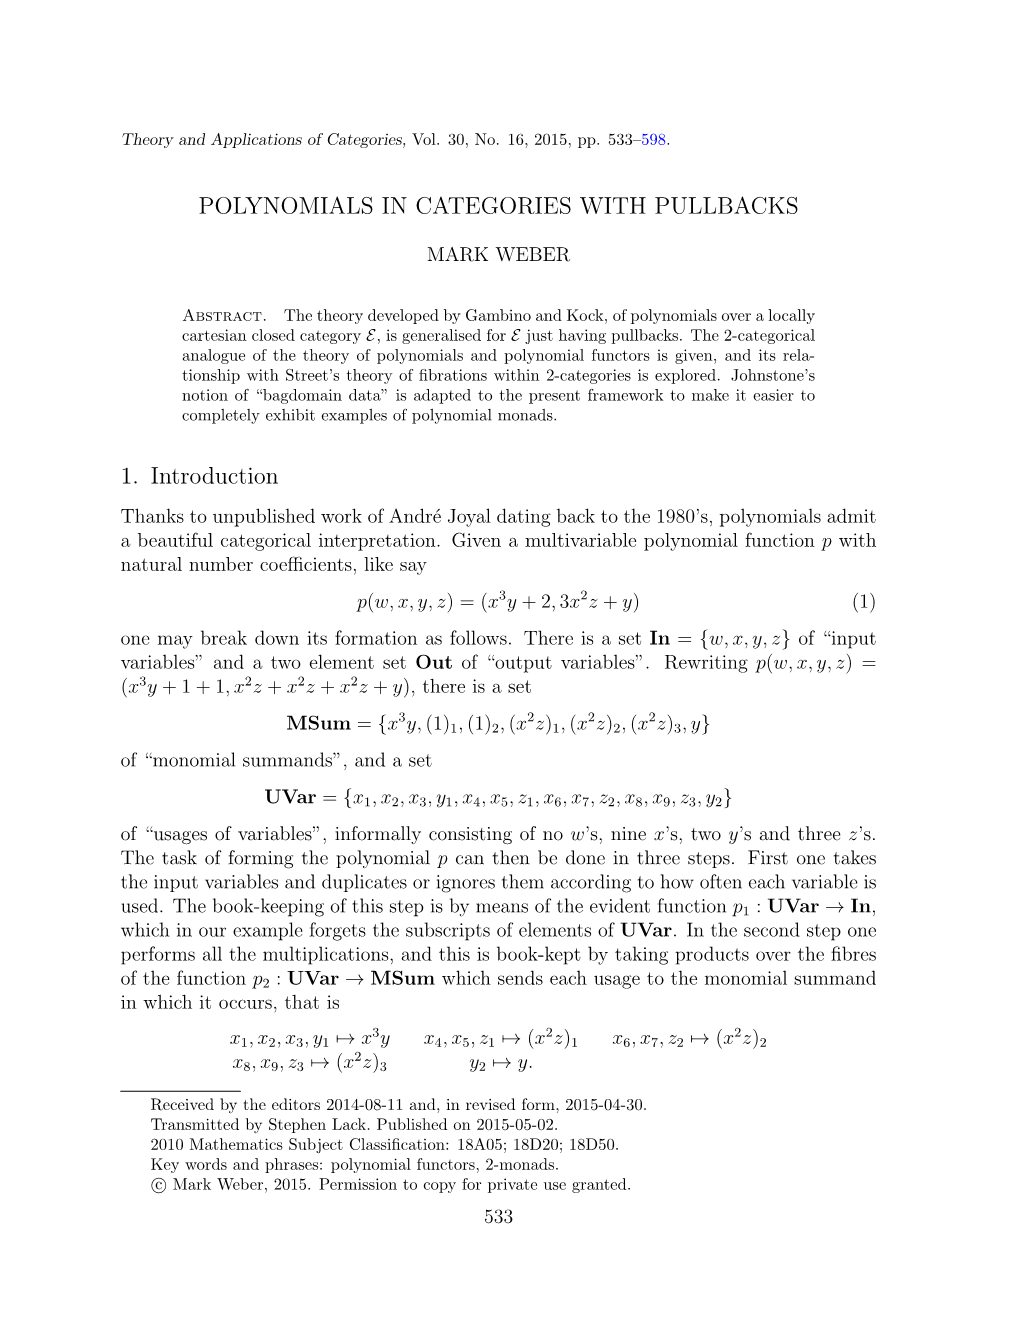 POLYNOMIALS in CATEGORIES with PULLBACKS 1. Introduction